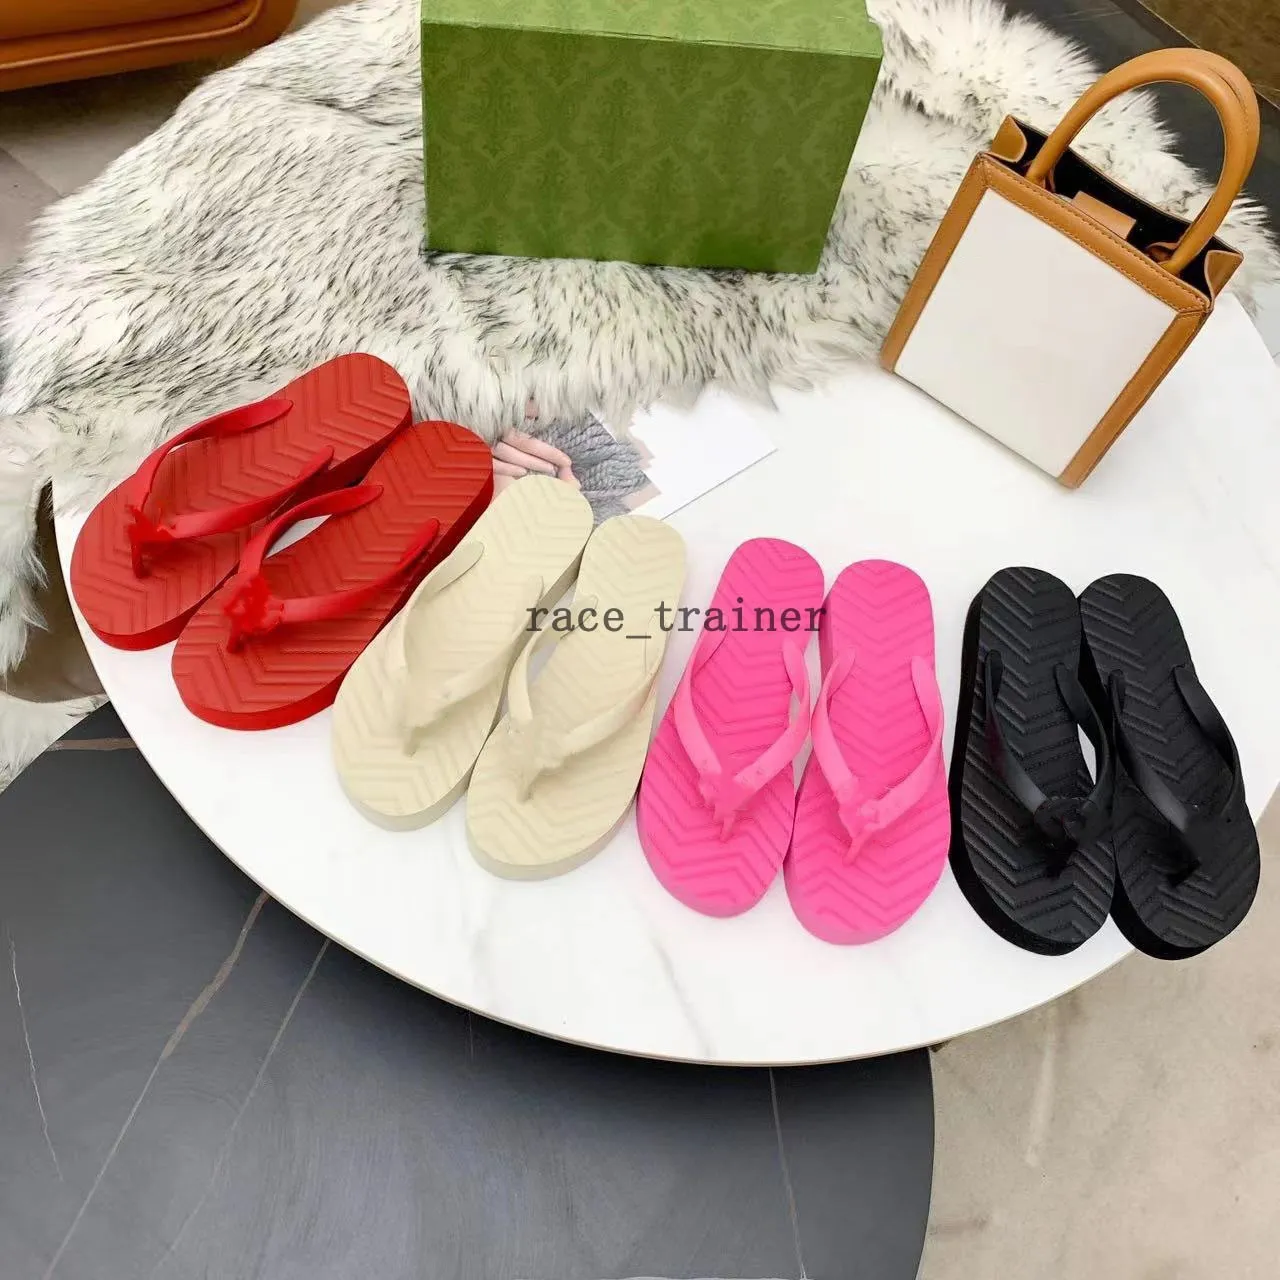 Fashion designer ladies flip flops simple youth slippers moccasin shoes suitable for spring summer and autumn hotels beaches other places 35-42 1.25 03